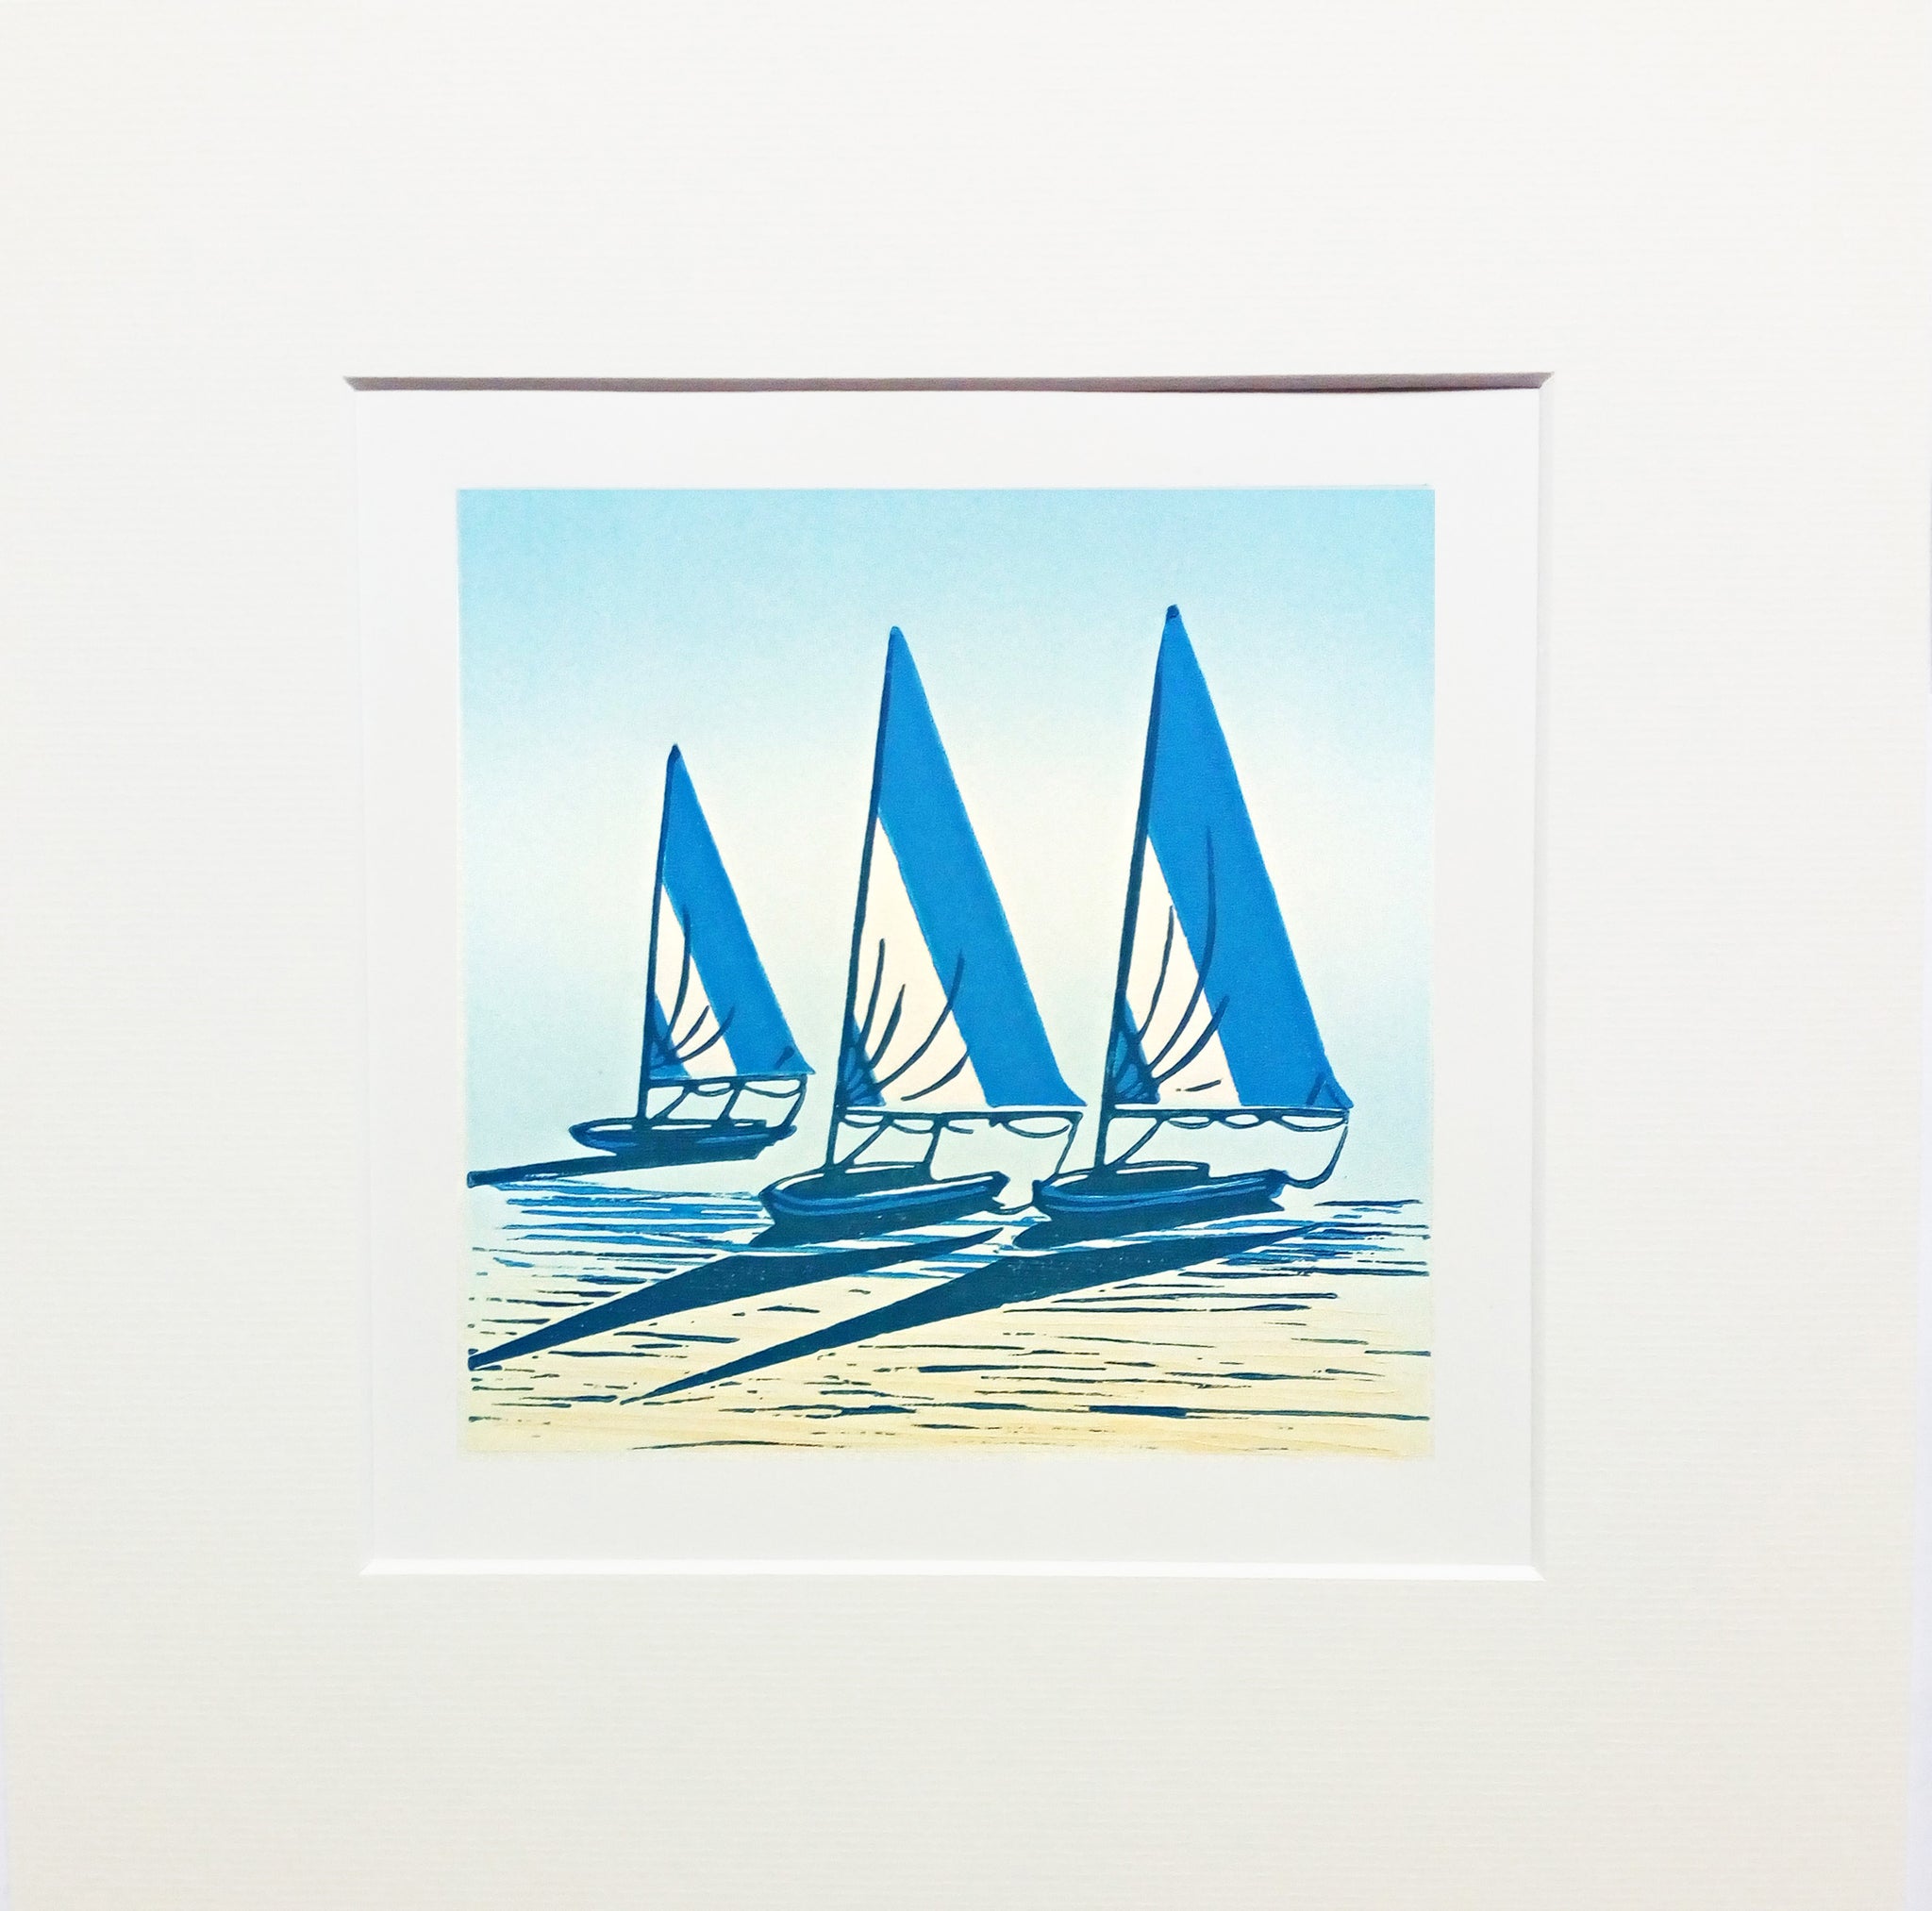 Mounted linocut in blue, yellow and black ink of sailing boats on the shore